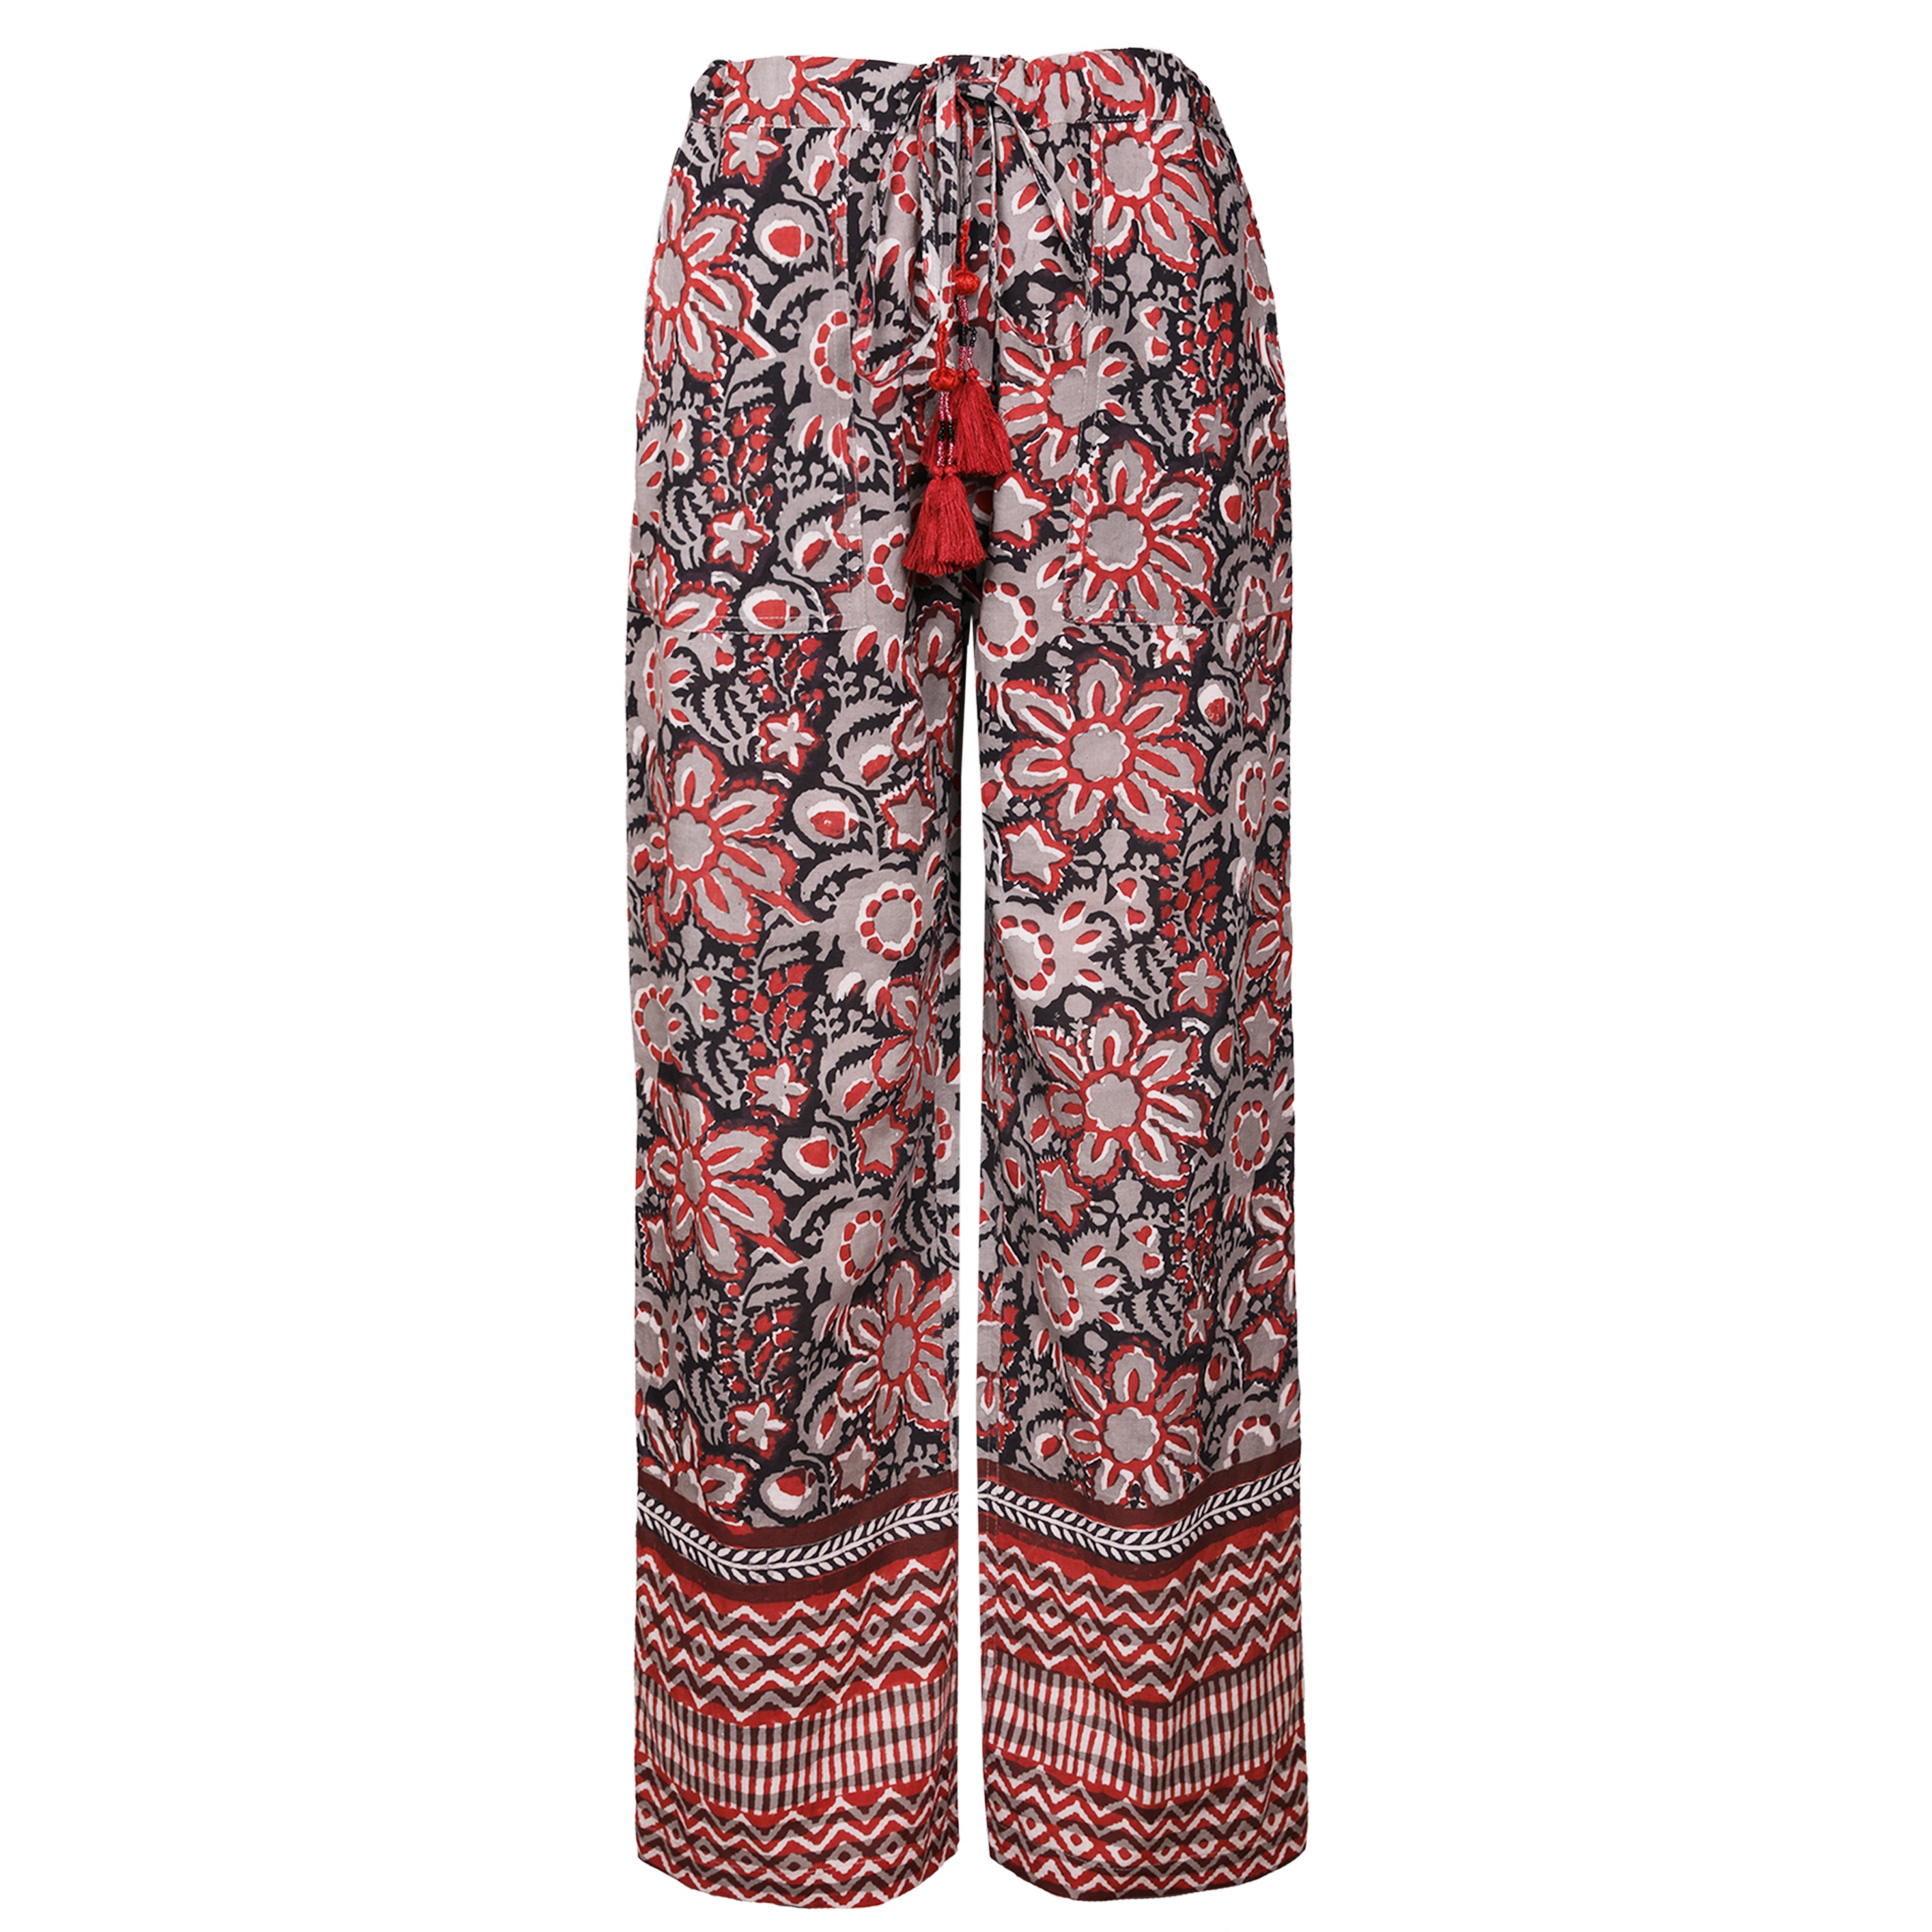 Boho Pants - Palazzo Pants in Floral in Indian Paisley Red For Women